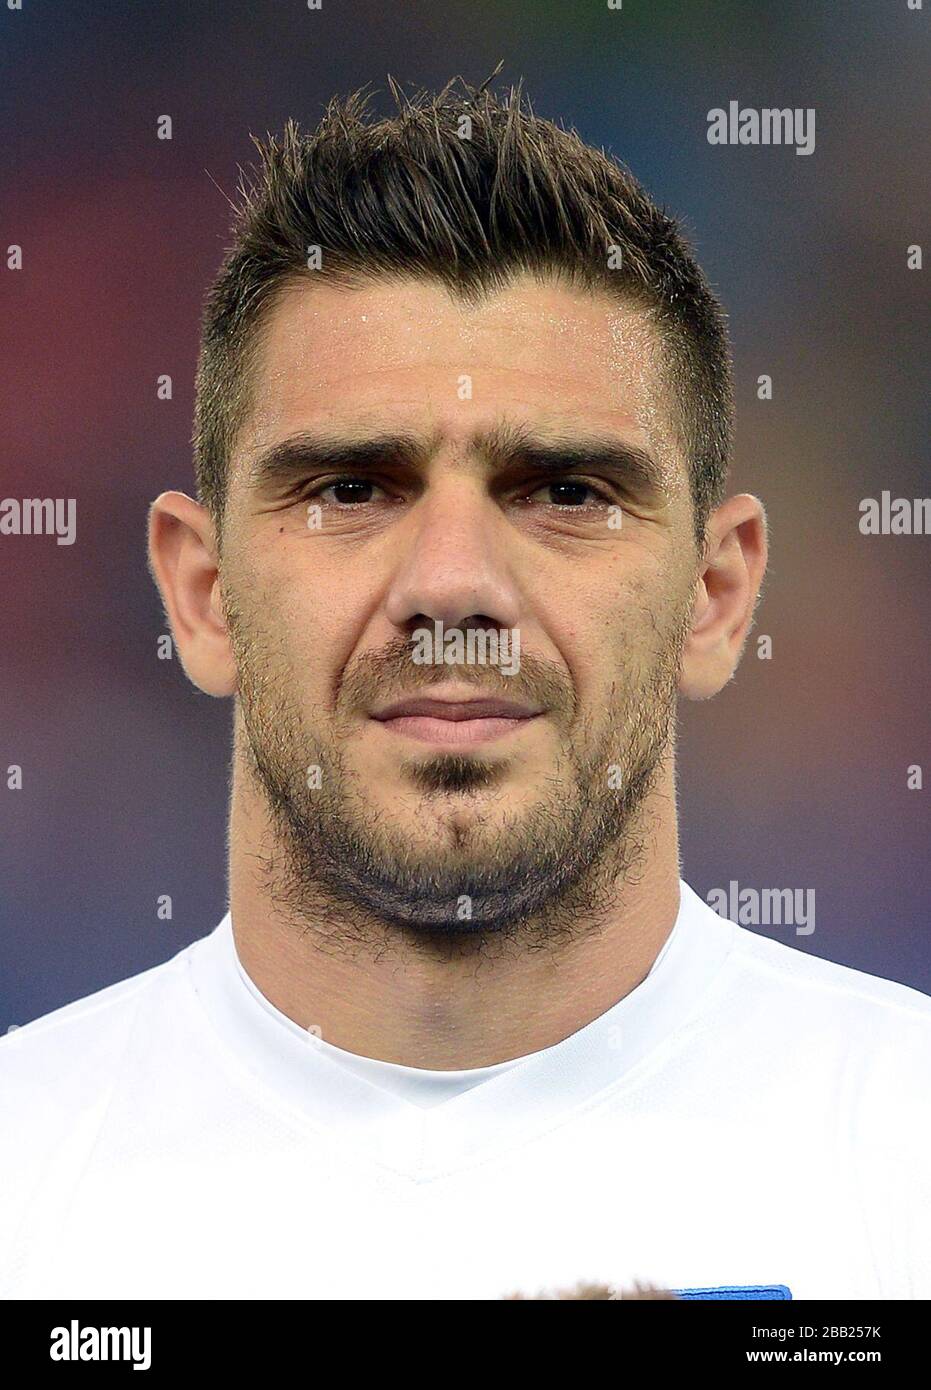 Katsouranis High Resolution Stock Photography and Images - Alamy